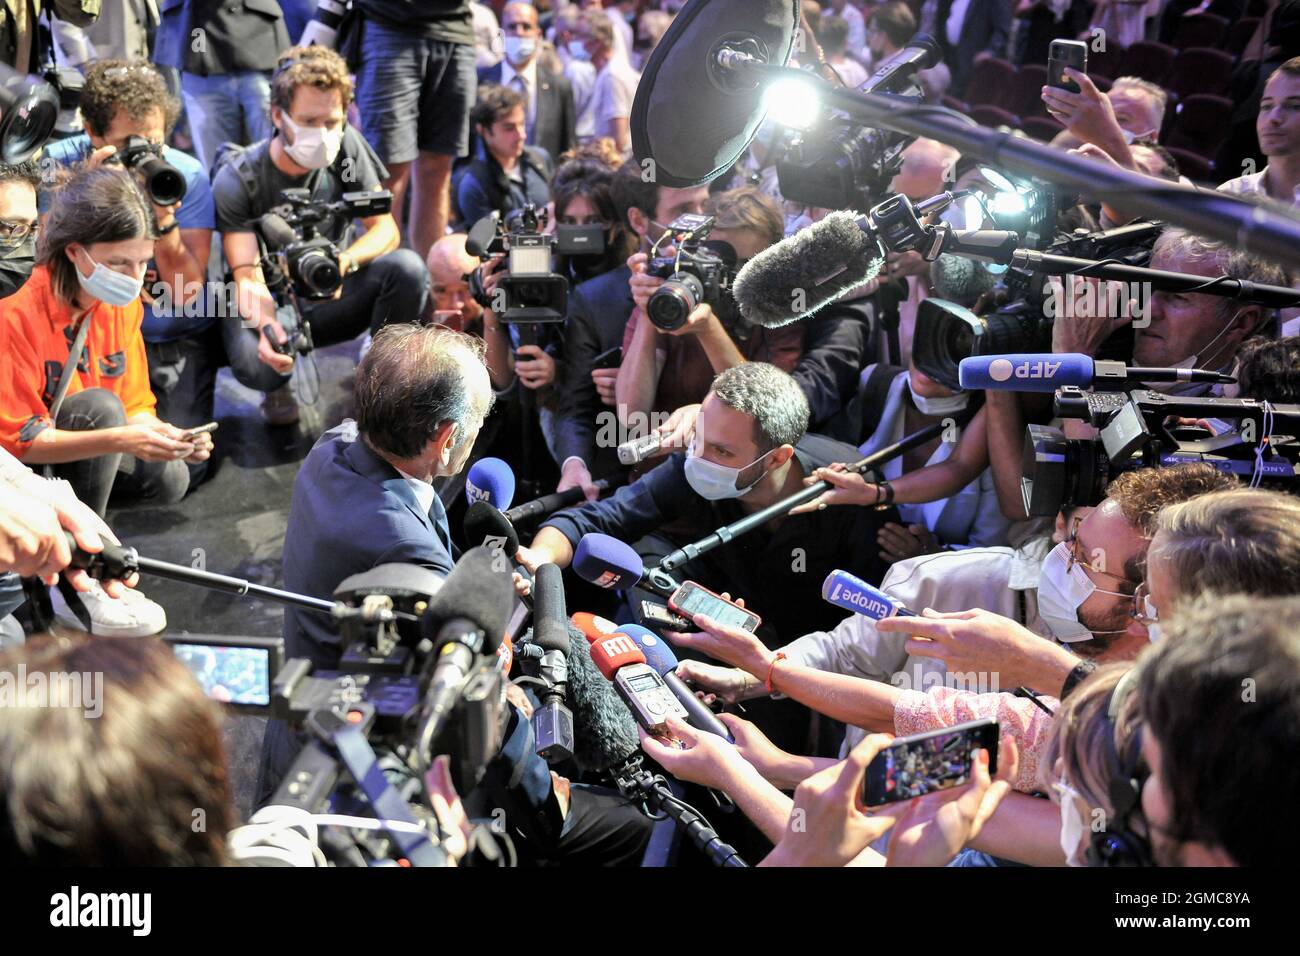 Toulon France 17th Sep 21 Eric Zemmour Seen Surrounded By The Media At The End Of His Speech In Toulon The French Far Right Polemicist And Political Journalist Eric Justin Leon Zemmour Eric